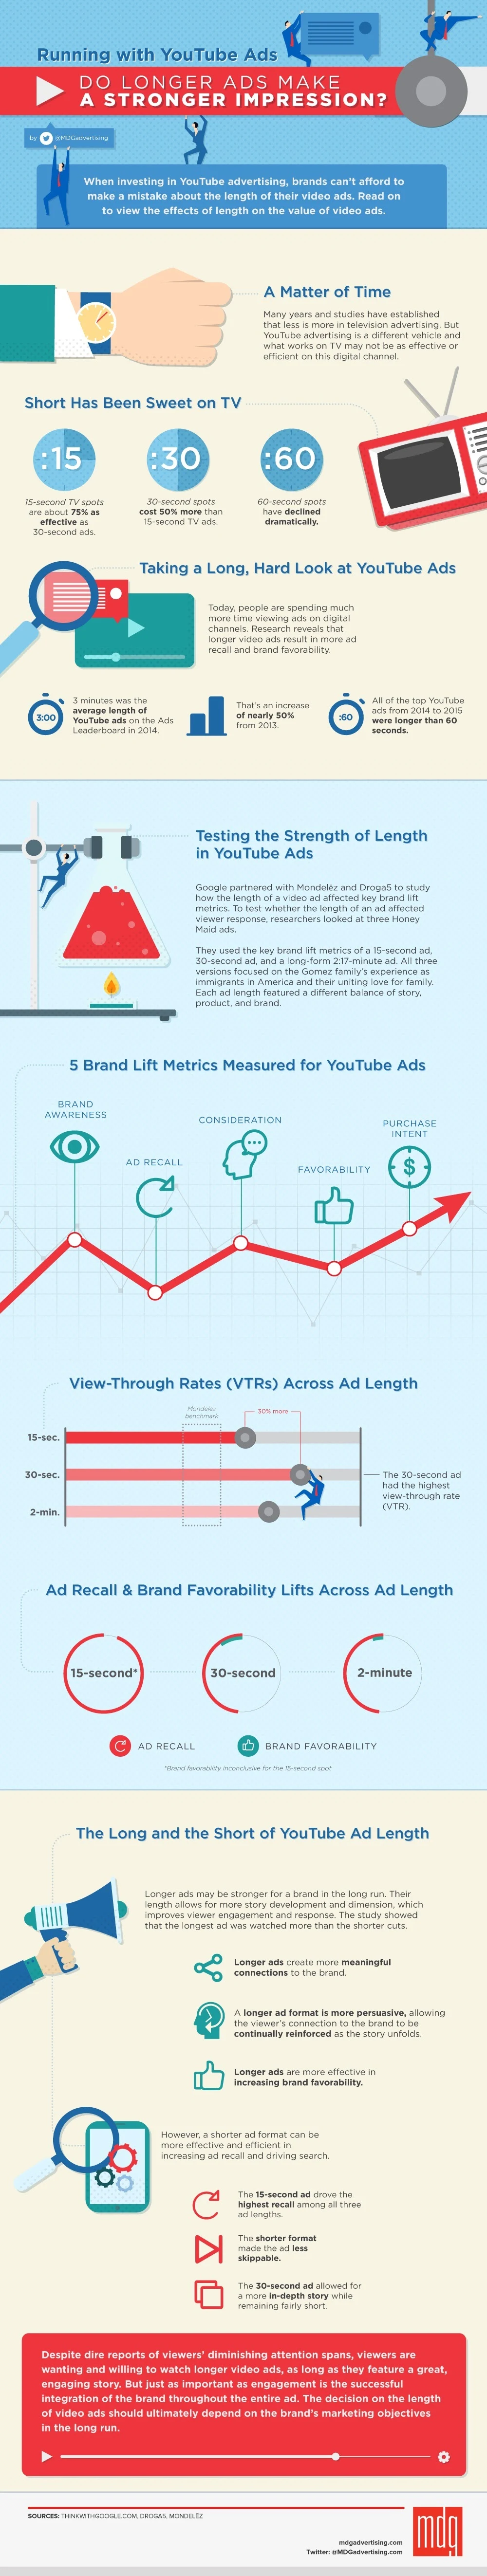 Running with YouTube Ads: Do Longer Ads Make a Stronger Impression? - #Infographic